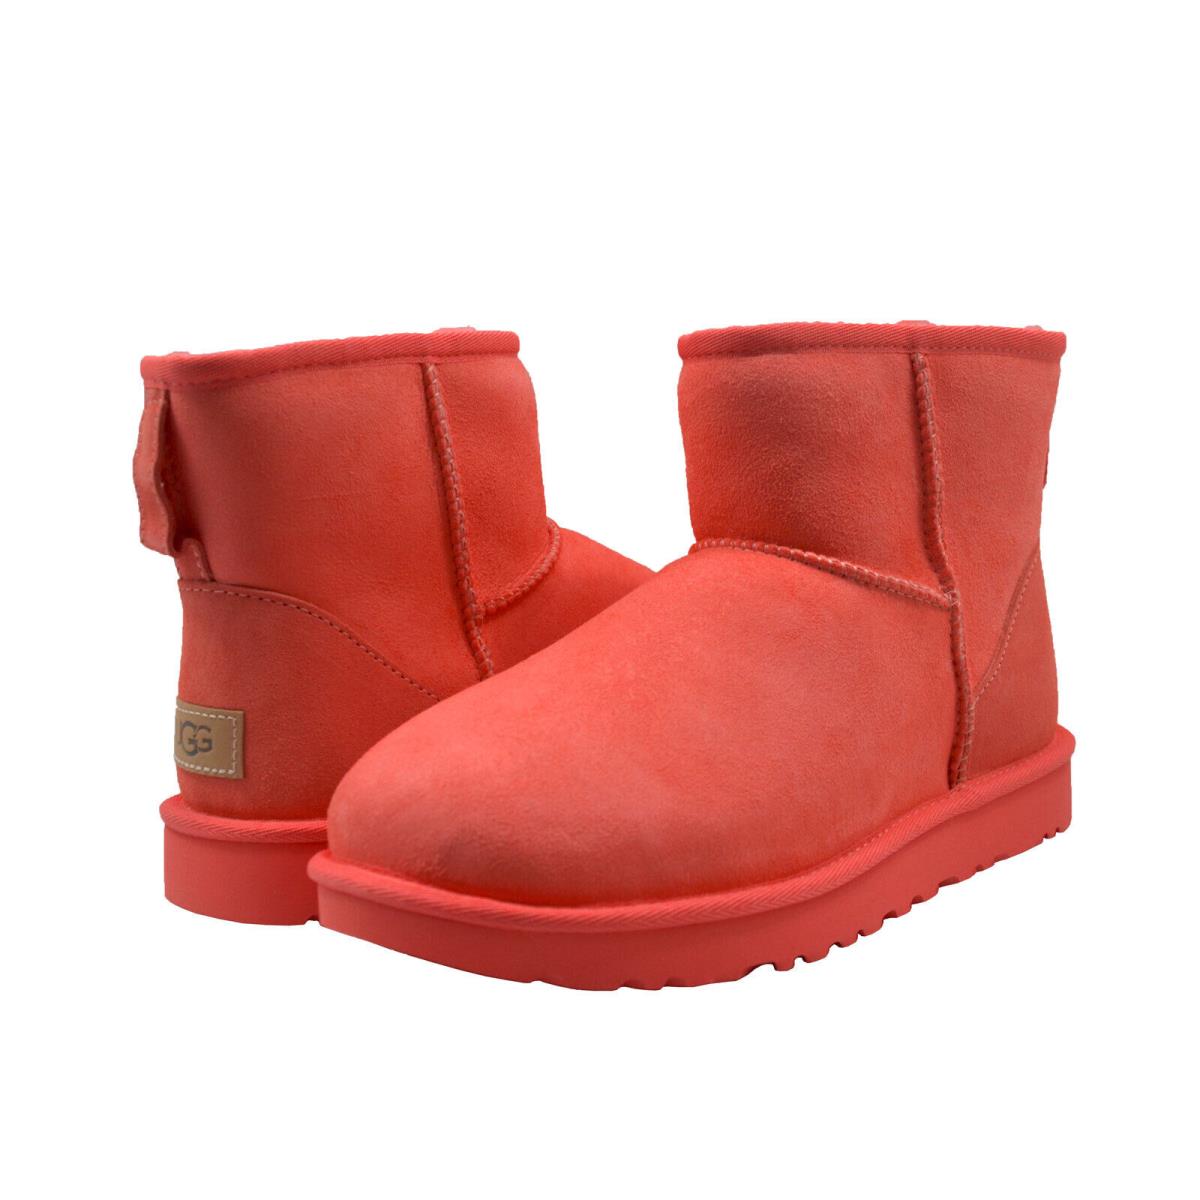 Women`s Shoes Ugg Classic Mini II Sheepskin Ankle Boots 1016222 Punch Pink - Pink